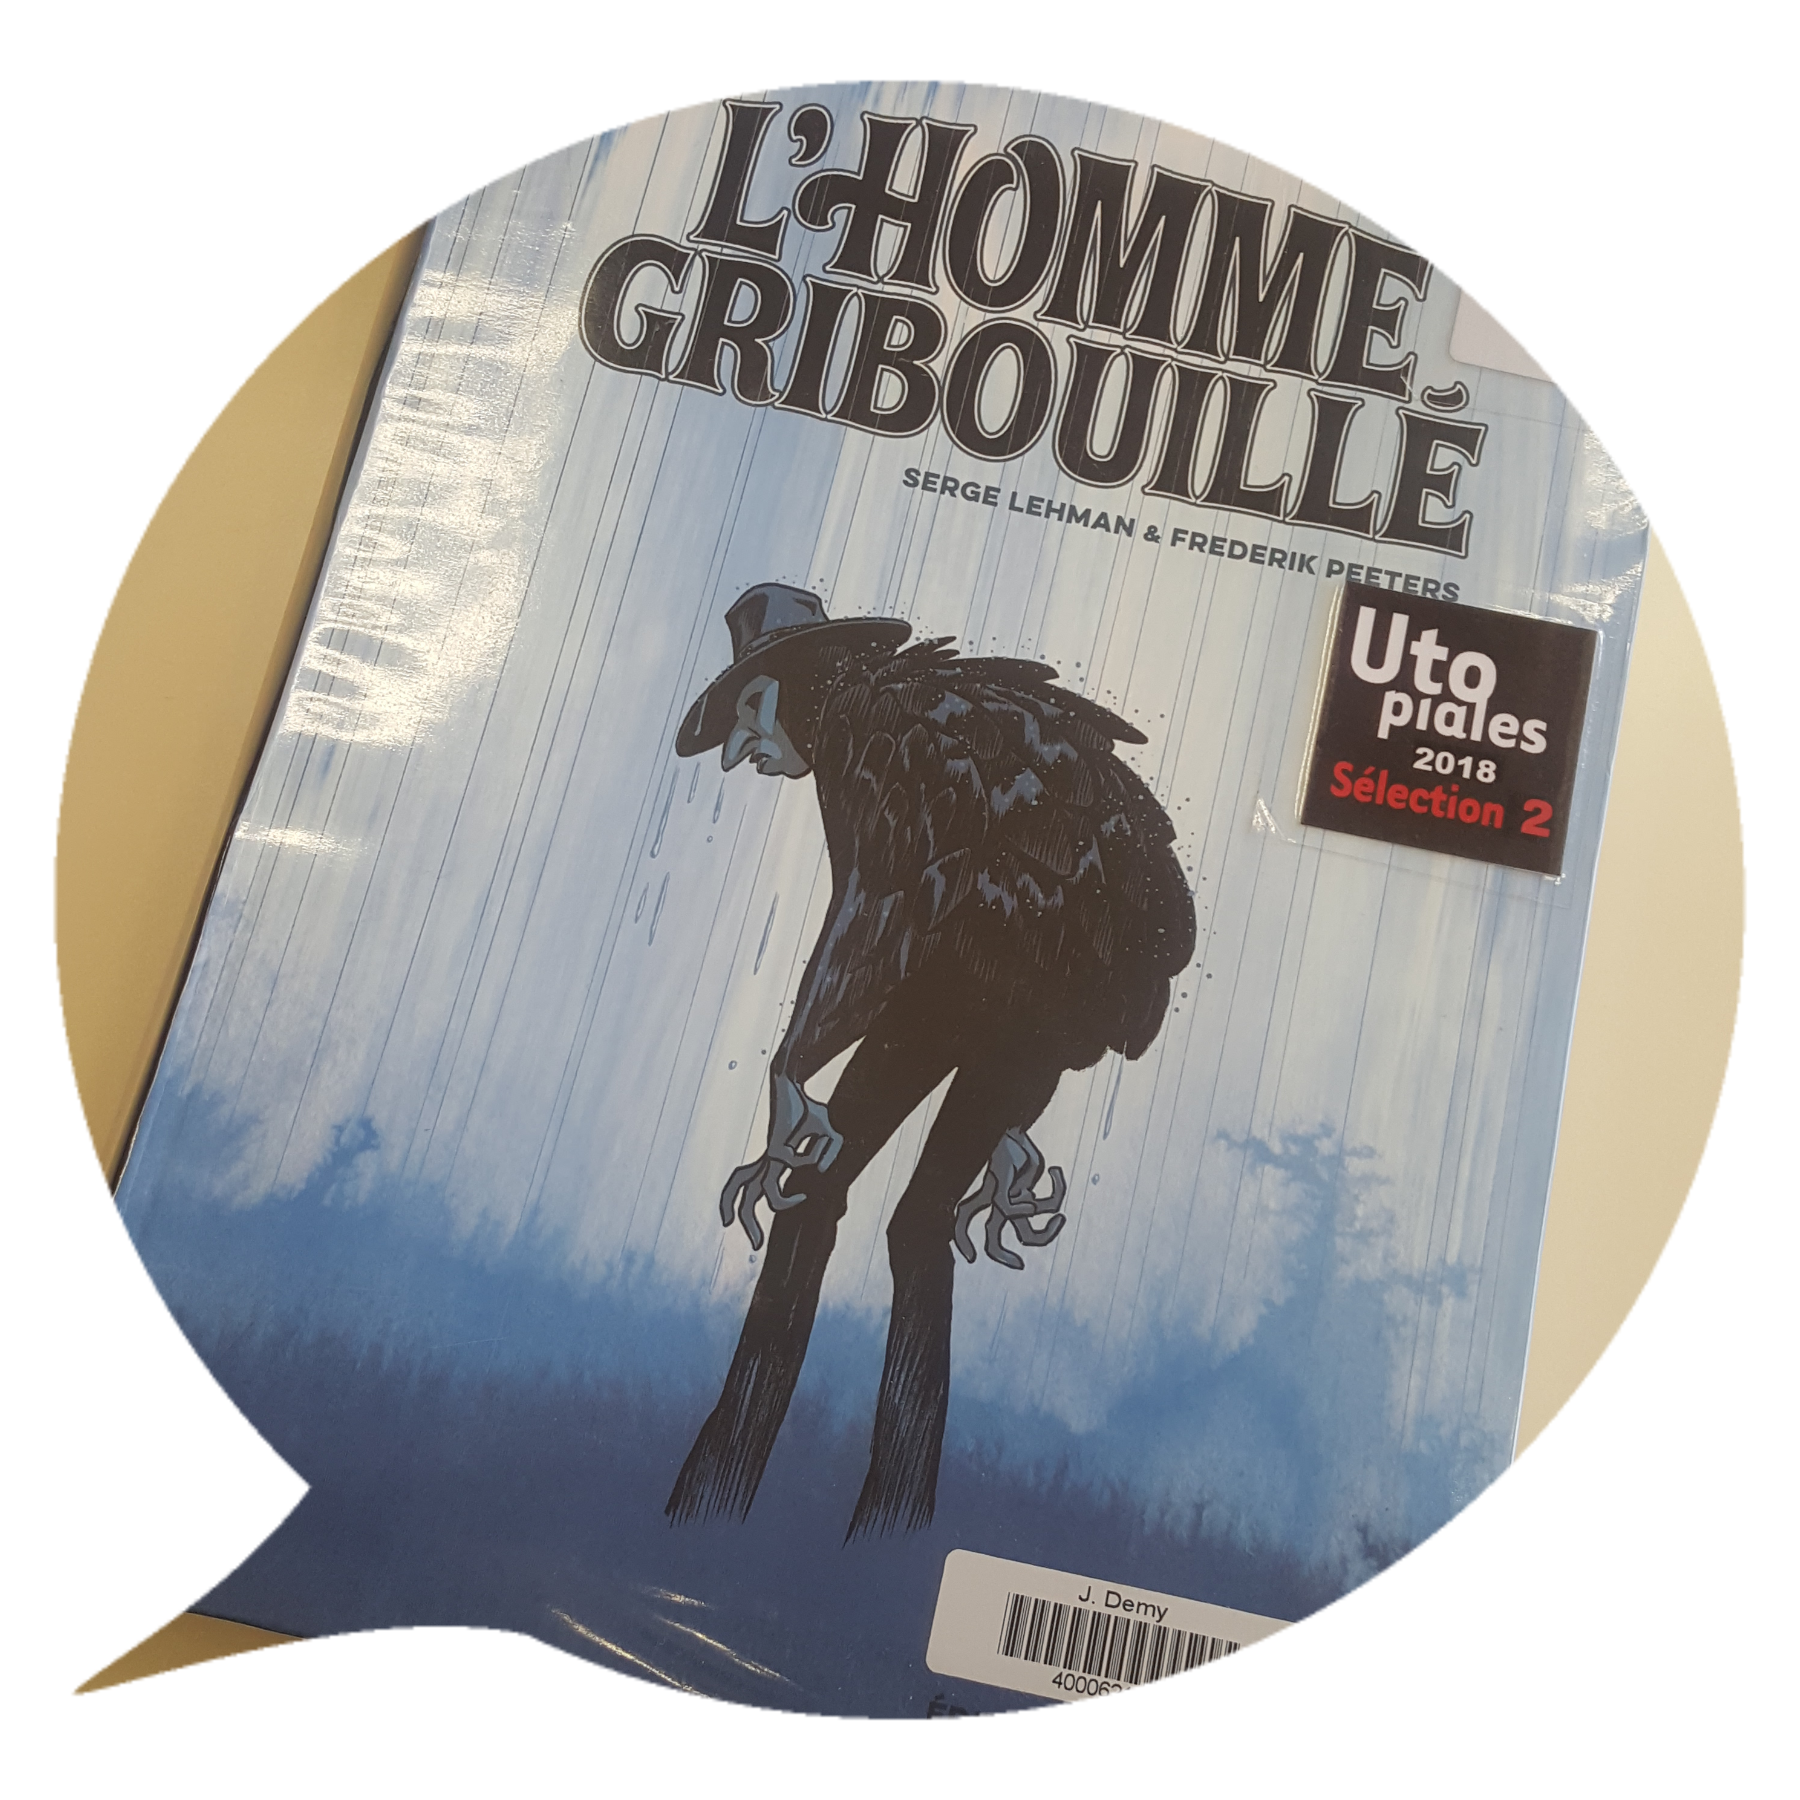 homme_gribouille